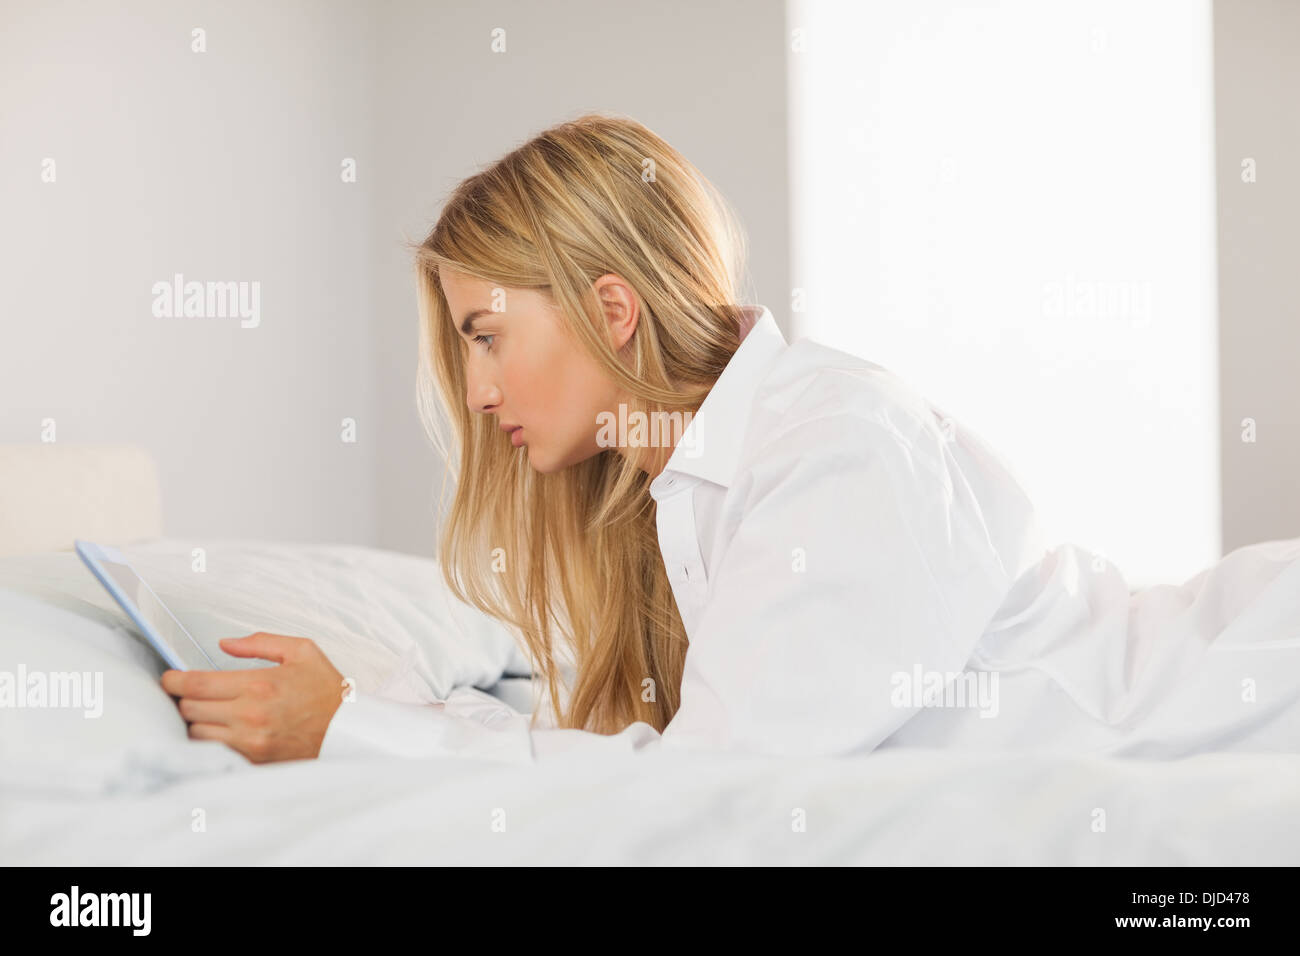 Pretty blonde wearing white mens shirt lying on bed using tablet Stock Photo